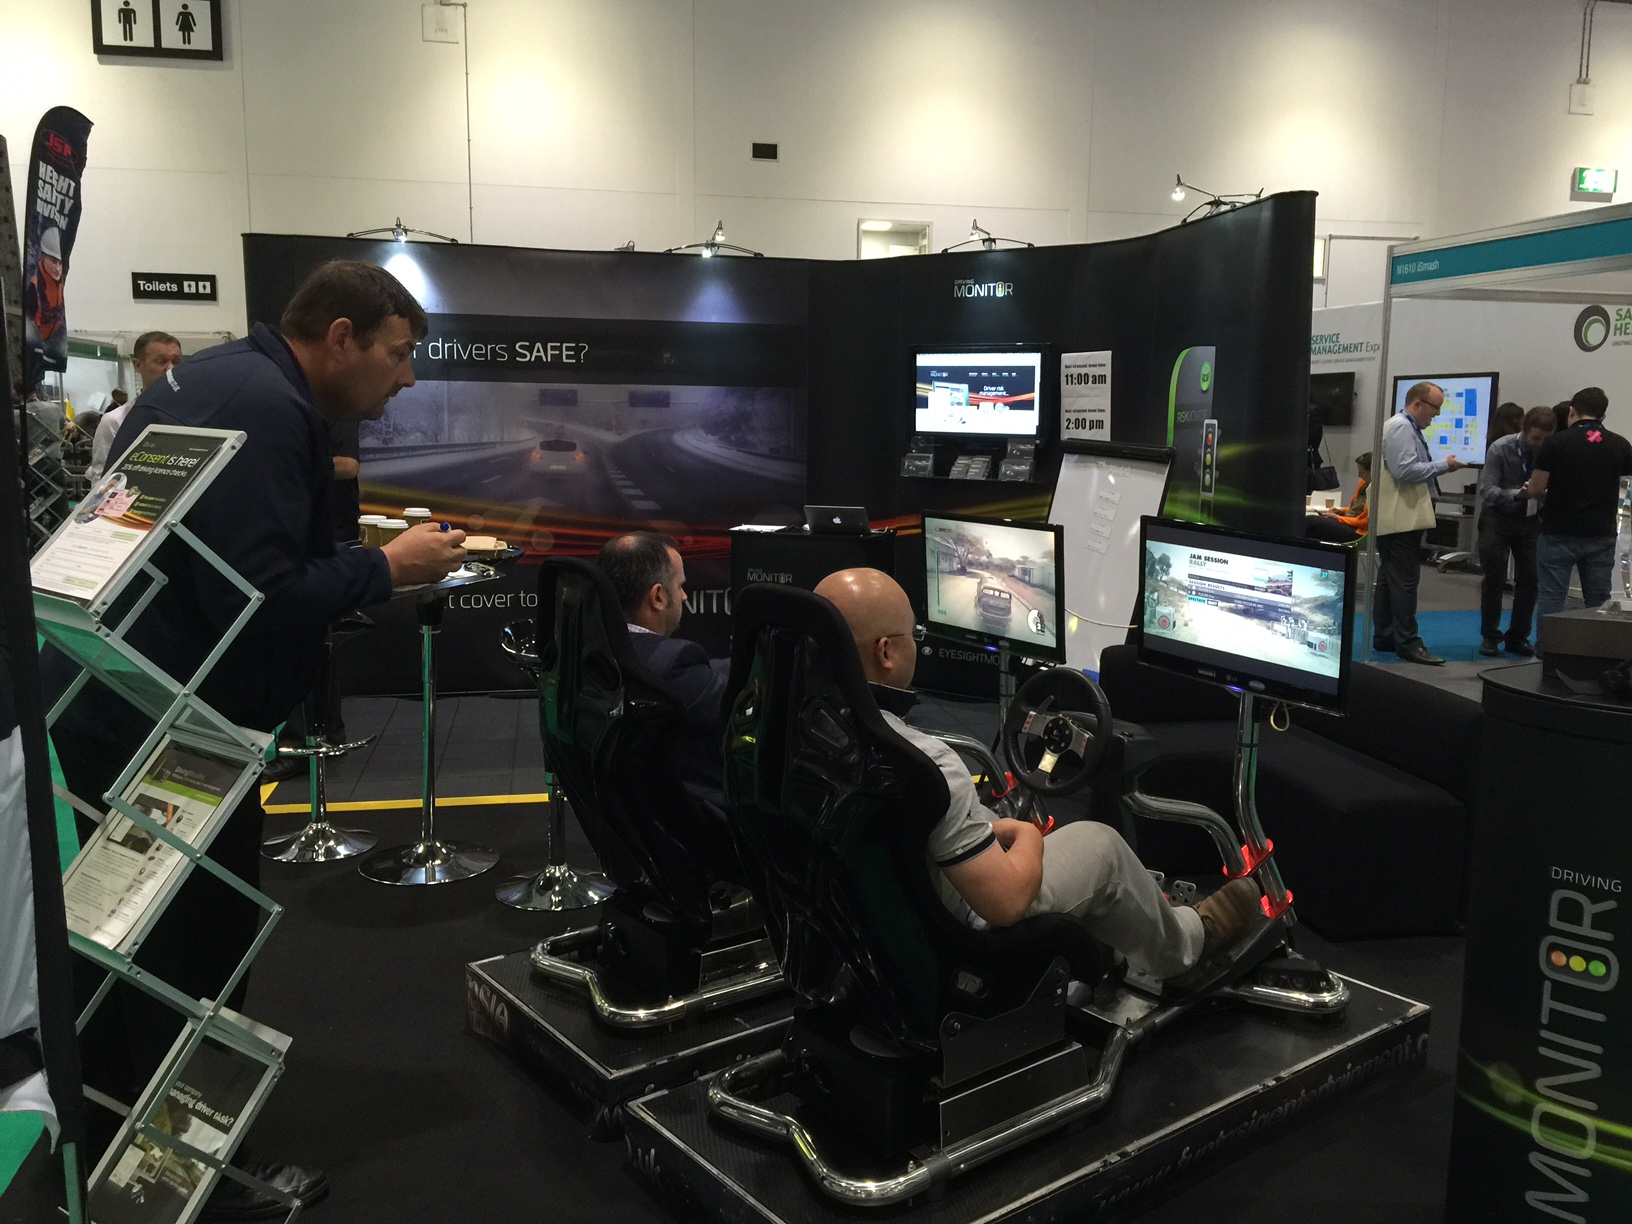 Mock trials, DVLA service review and racing simulators at the Expo in ExCeL this week